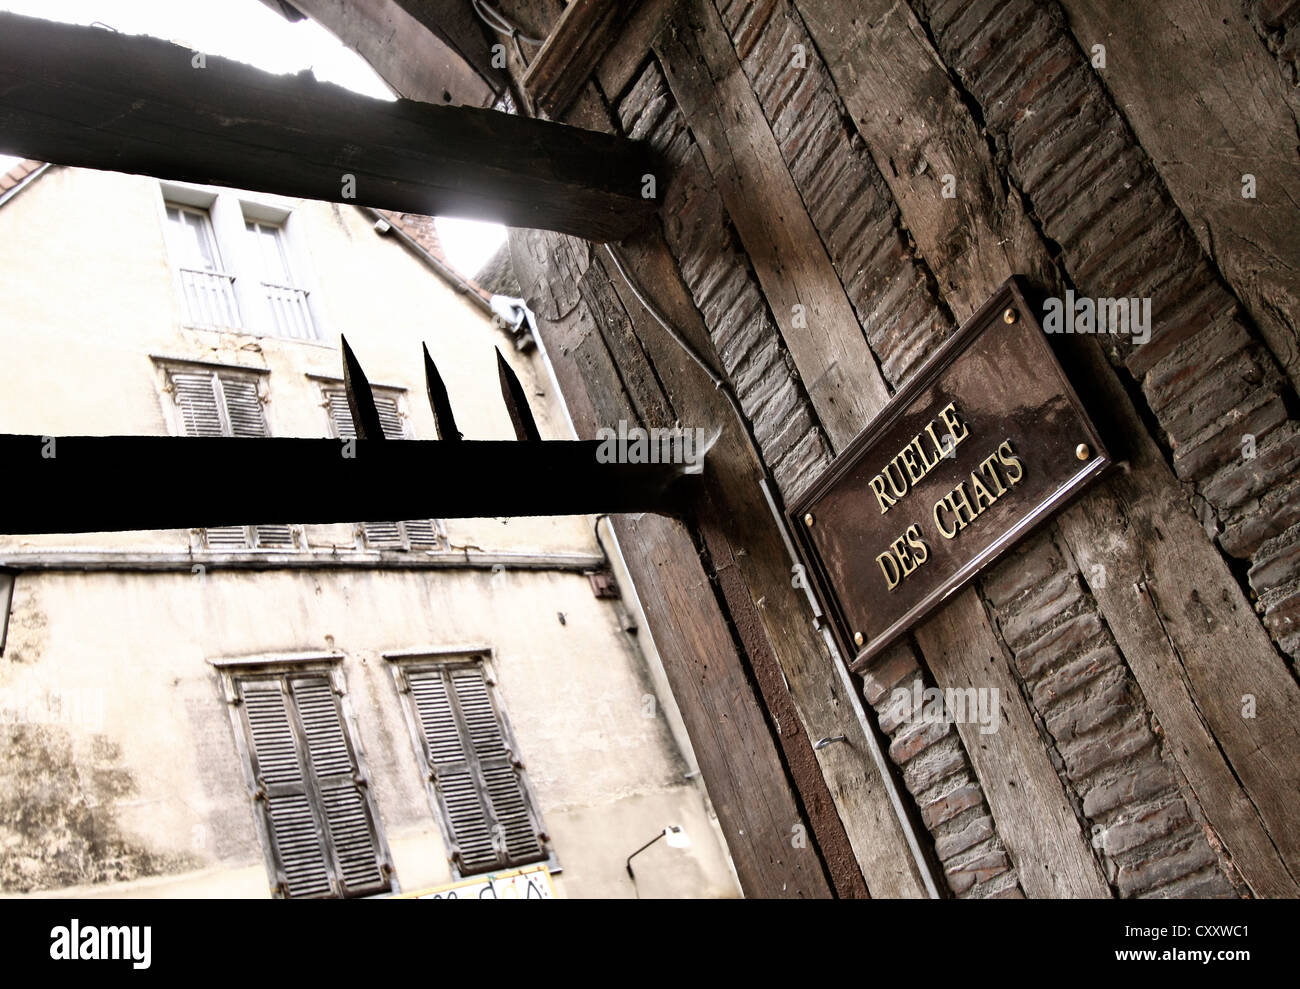 Ruelle de Chats street, street sign, entrance, Troyes, France, Europe Stock Photo